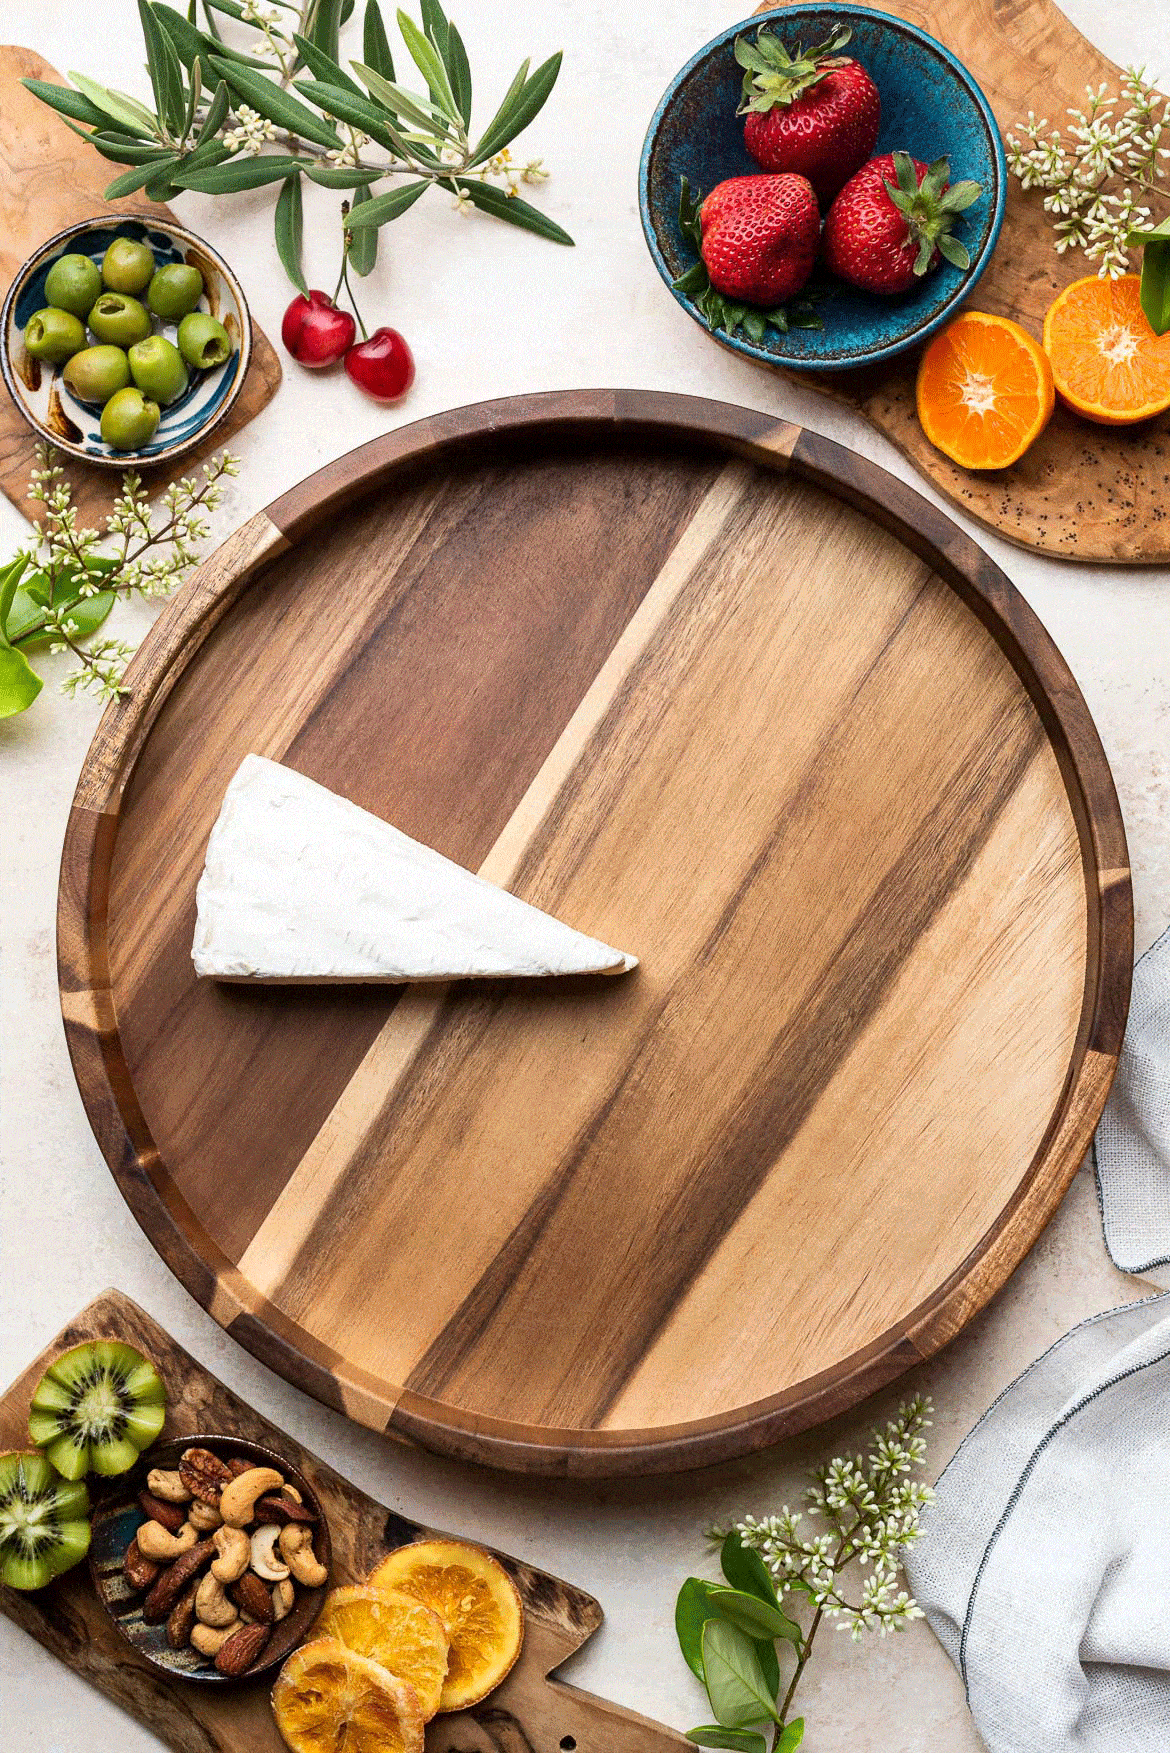 A GIF showing how to make a charcuterie board, step by step, on a wooden platter with meats and cheeses.